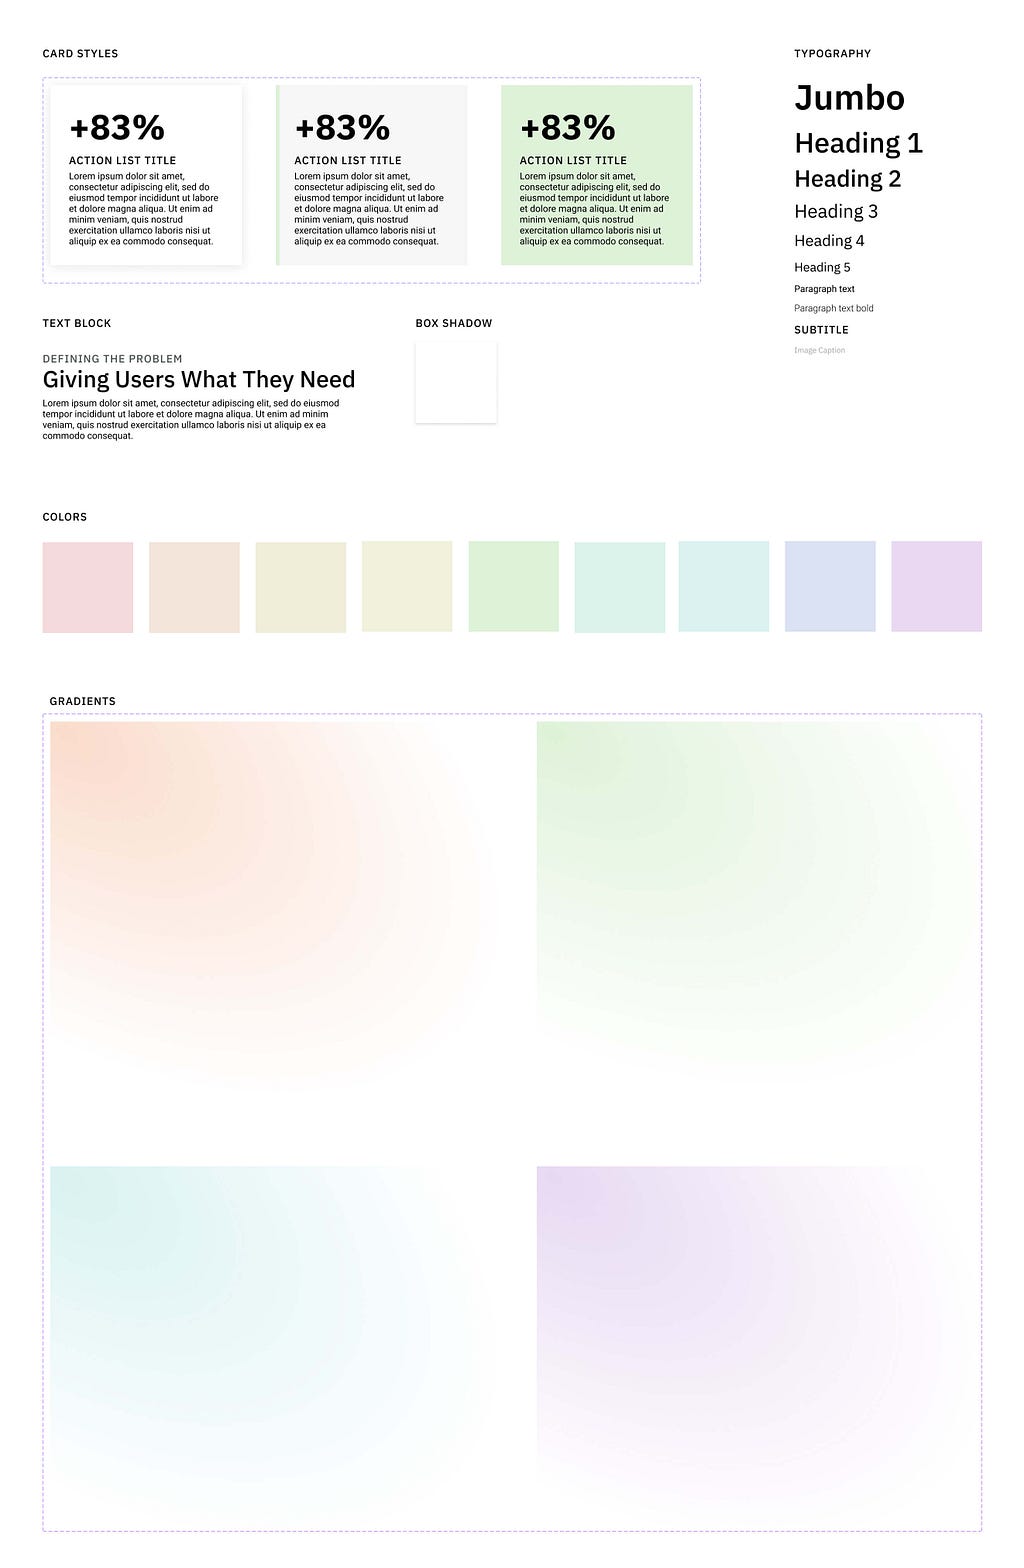 A visual style guide for the presentation templates, including colors, typography and card styles